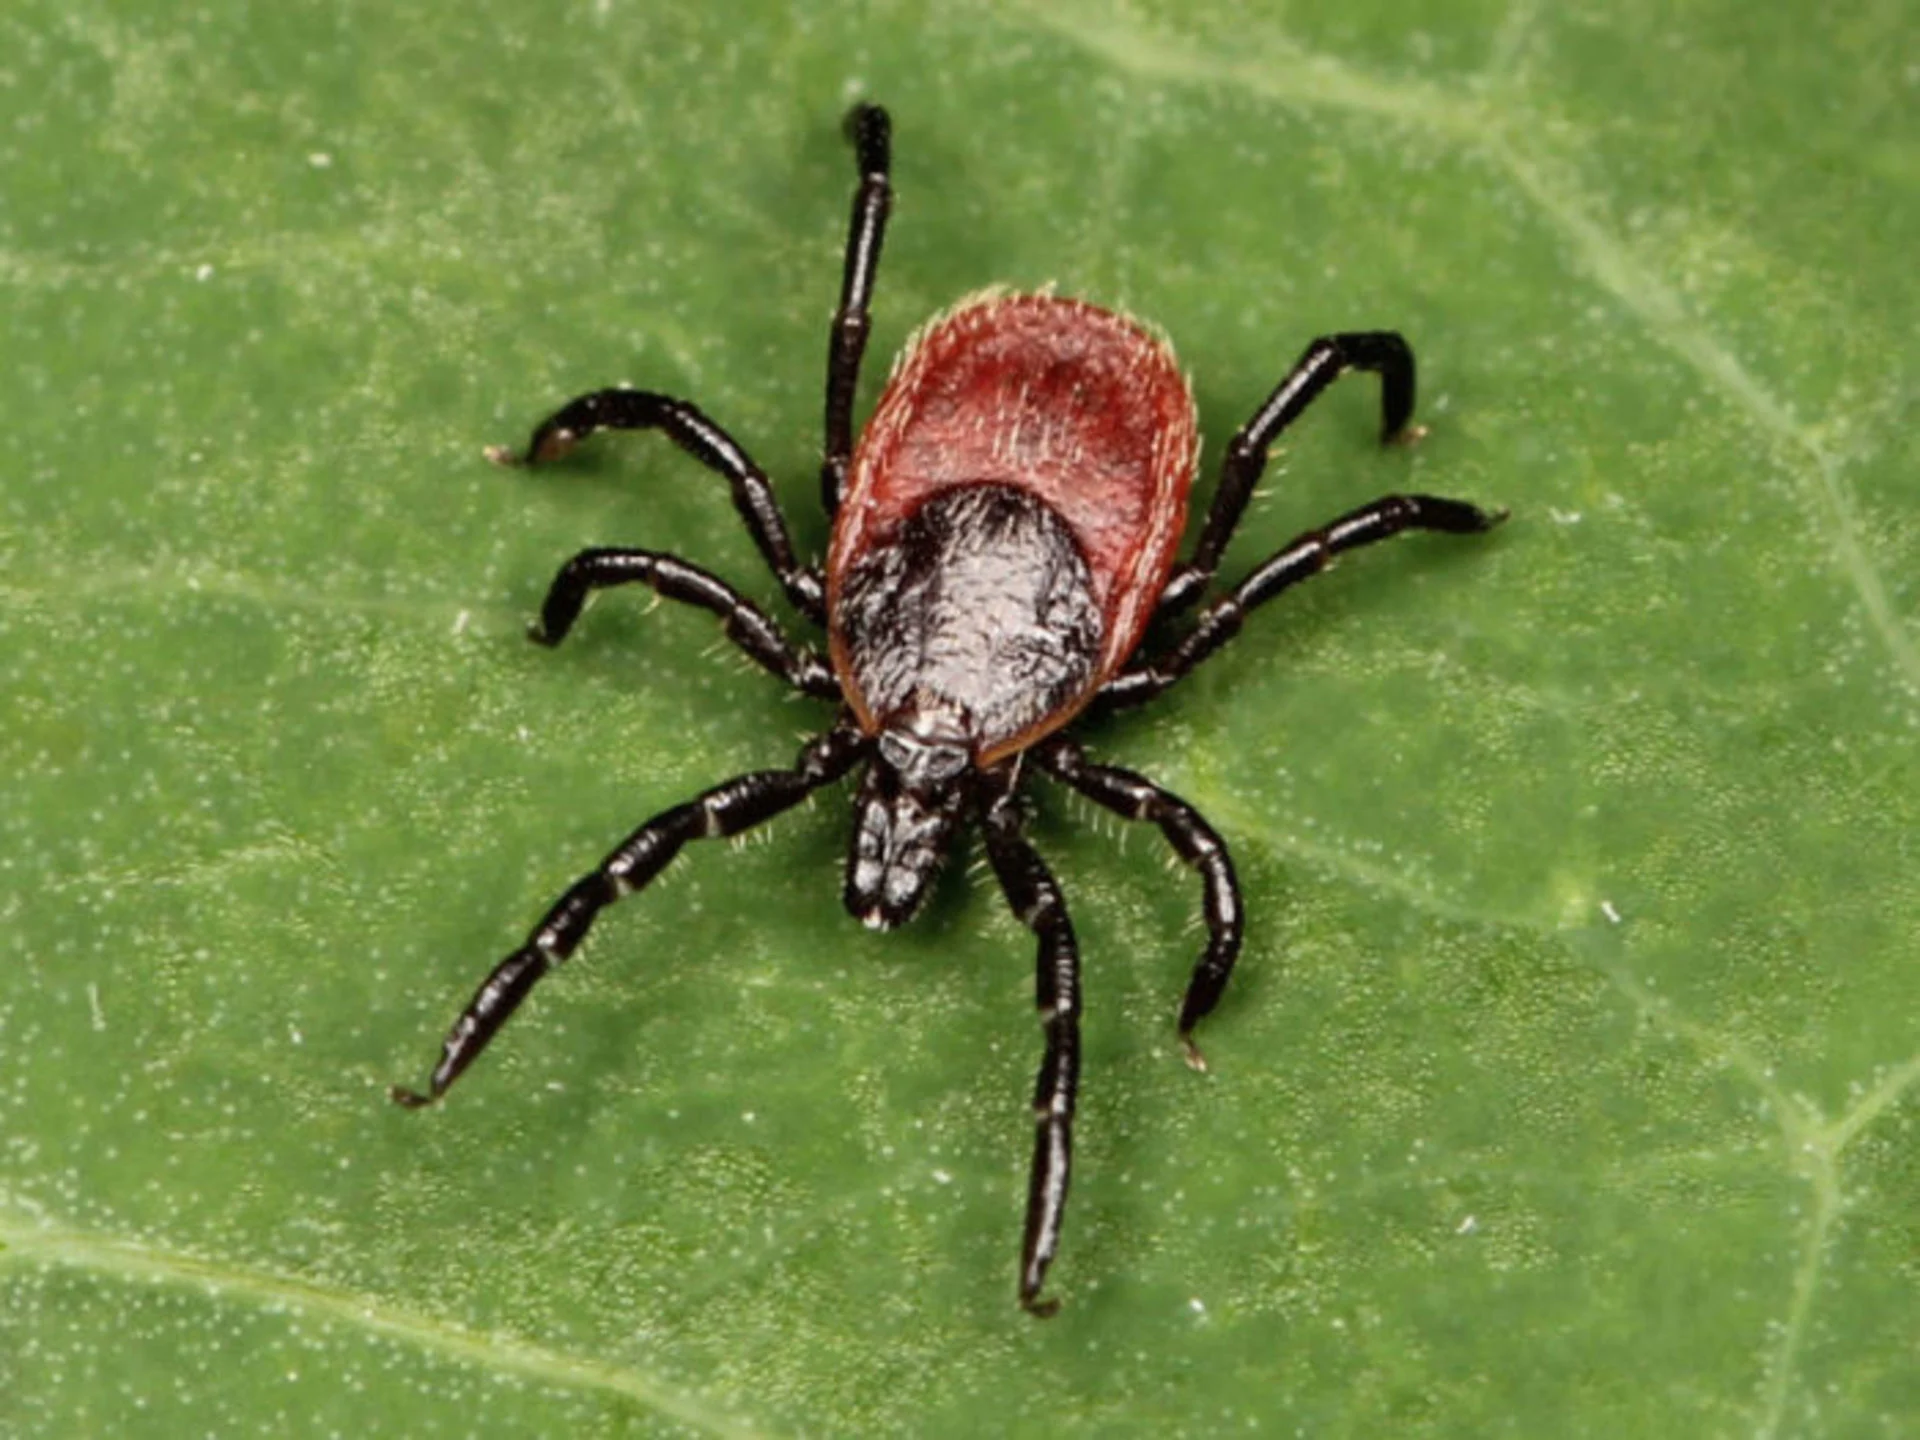 Anaplasmosis: This tick-borne disease is on the rise in Canada